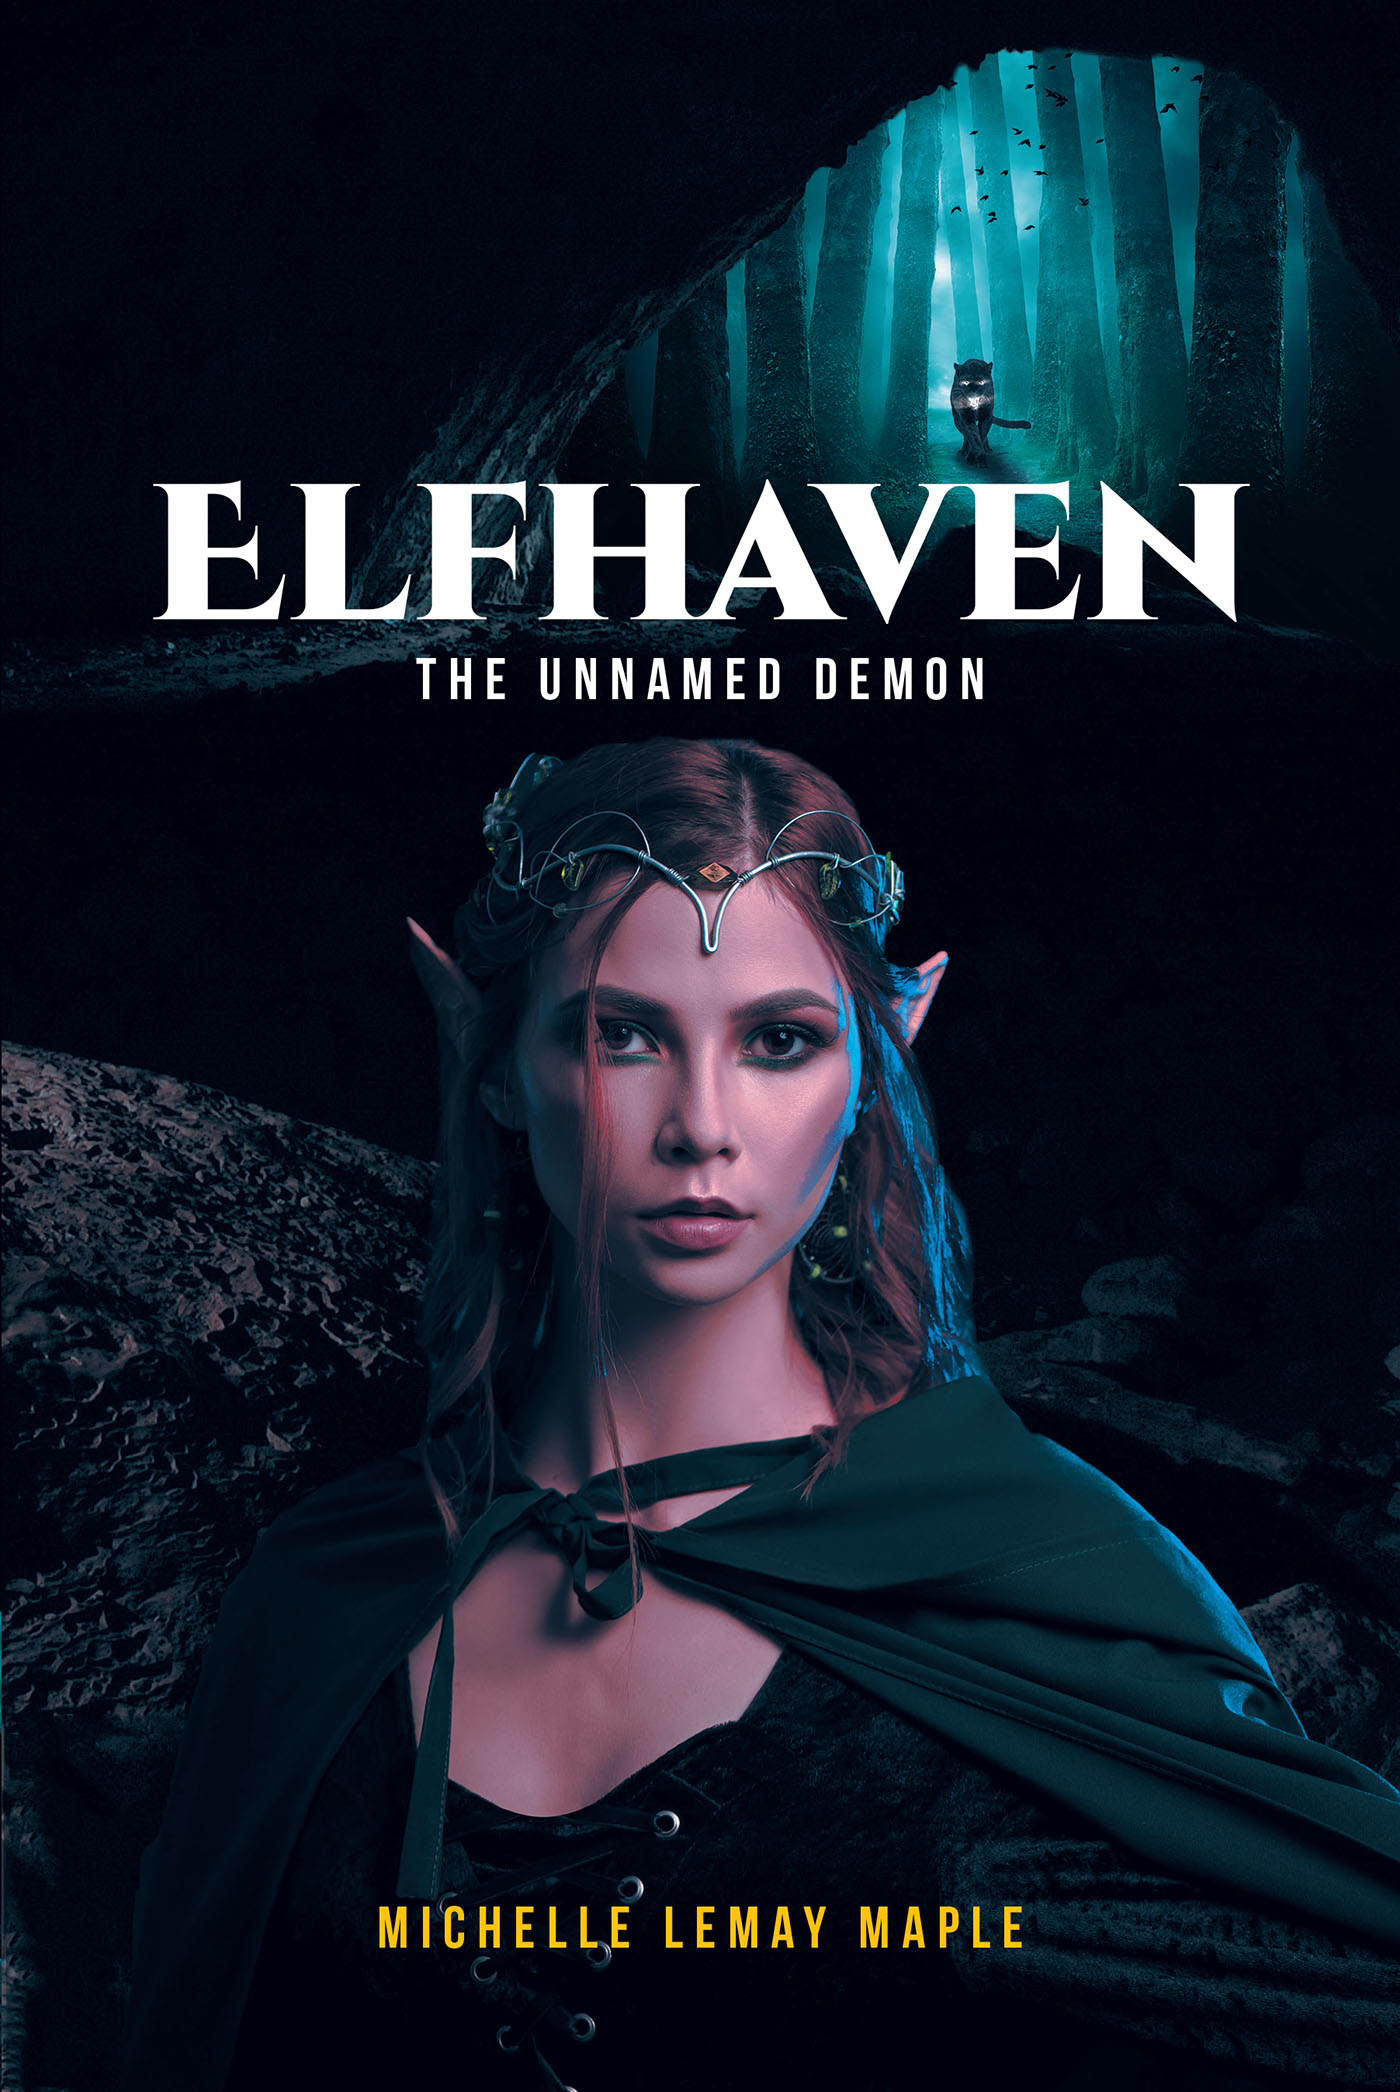 Michelle LeMay Maple’s New Book, "Elfhaven: The Unnamed Demon," is a Thrilling Fantasy Novel About a Sinister Threat Looming Over a Mystical Community of Elves